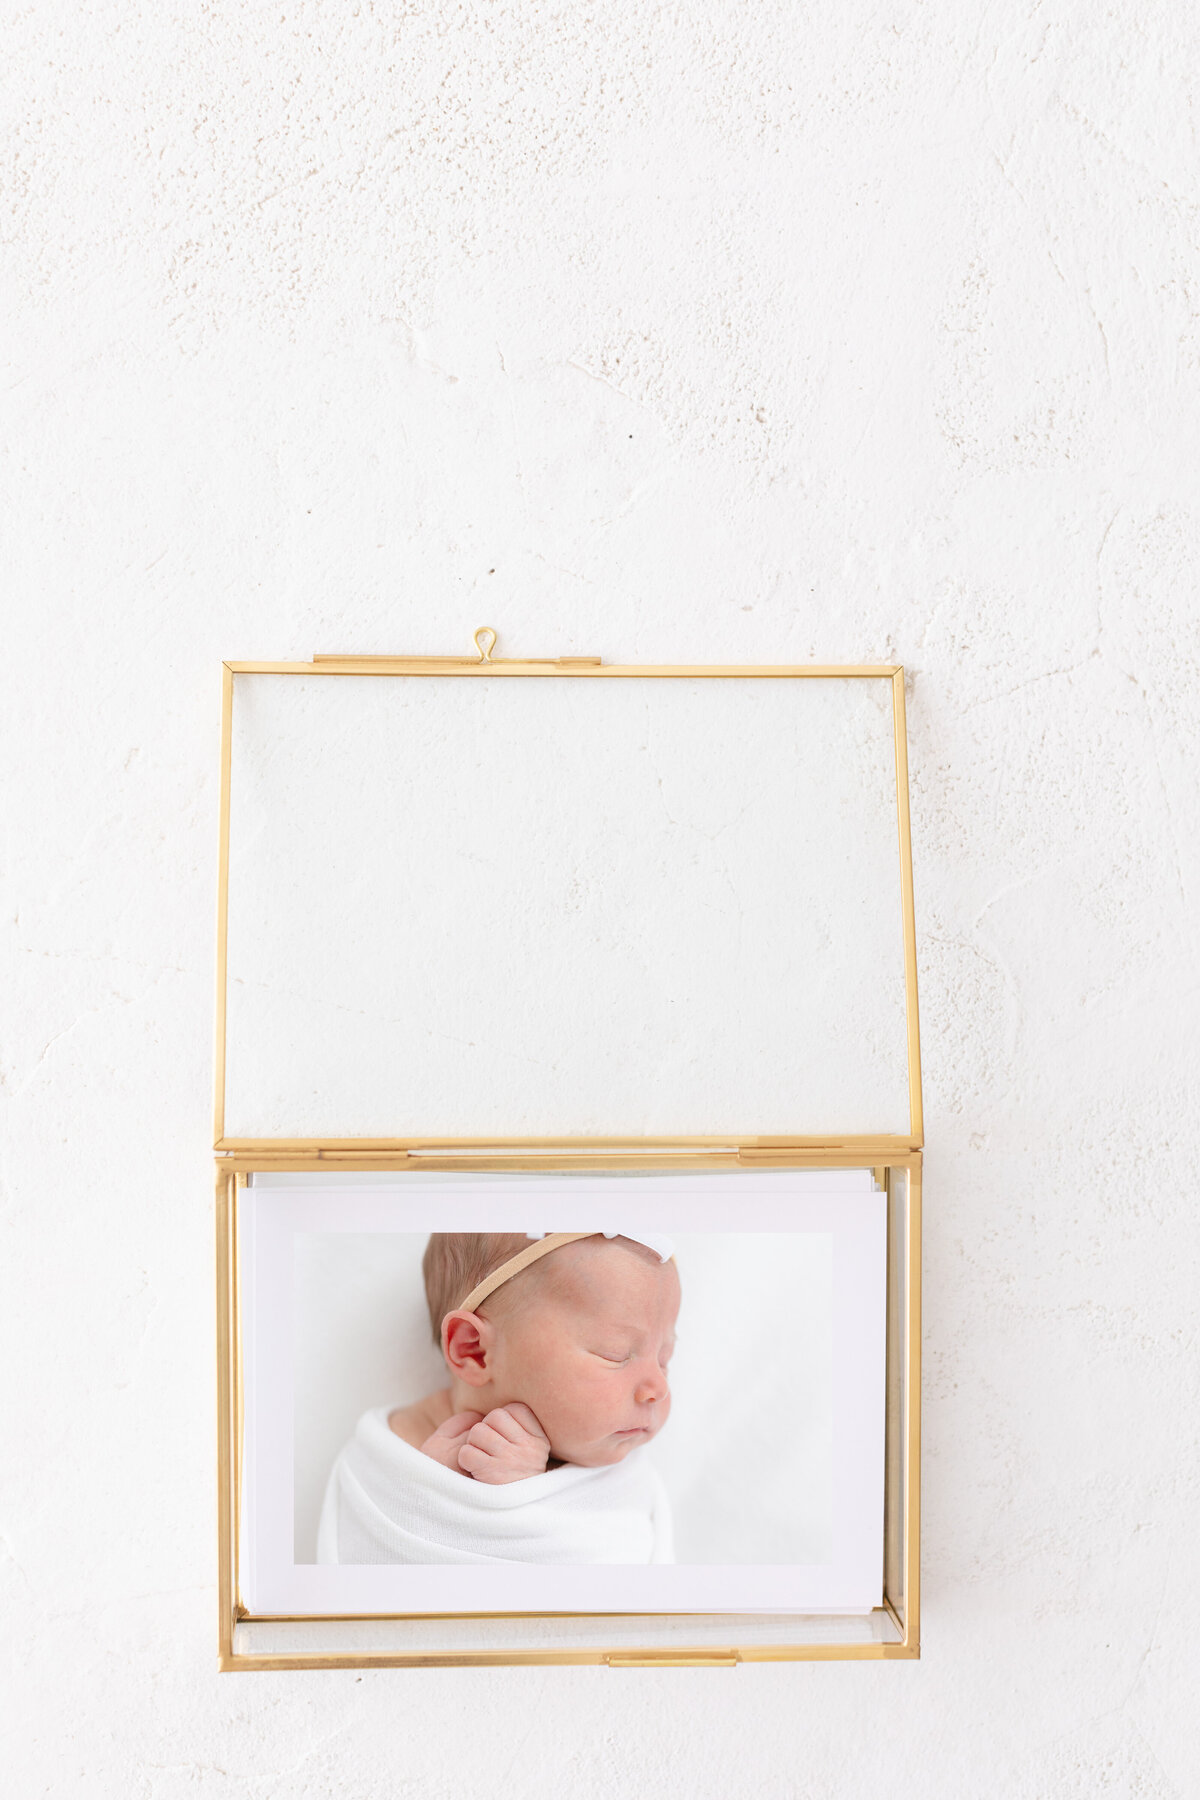 Glass box full of photos from a newborn session taken by Missy Marshall newborn photographer